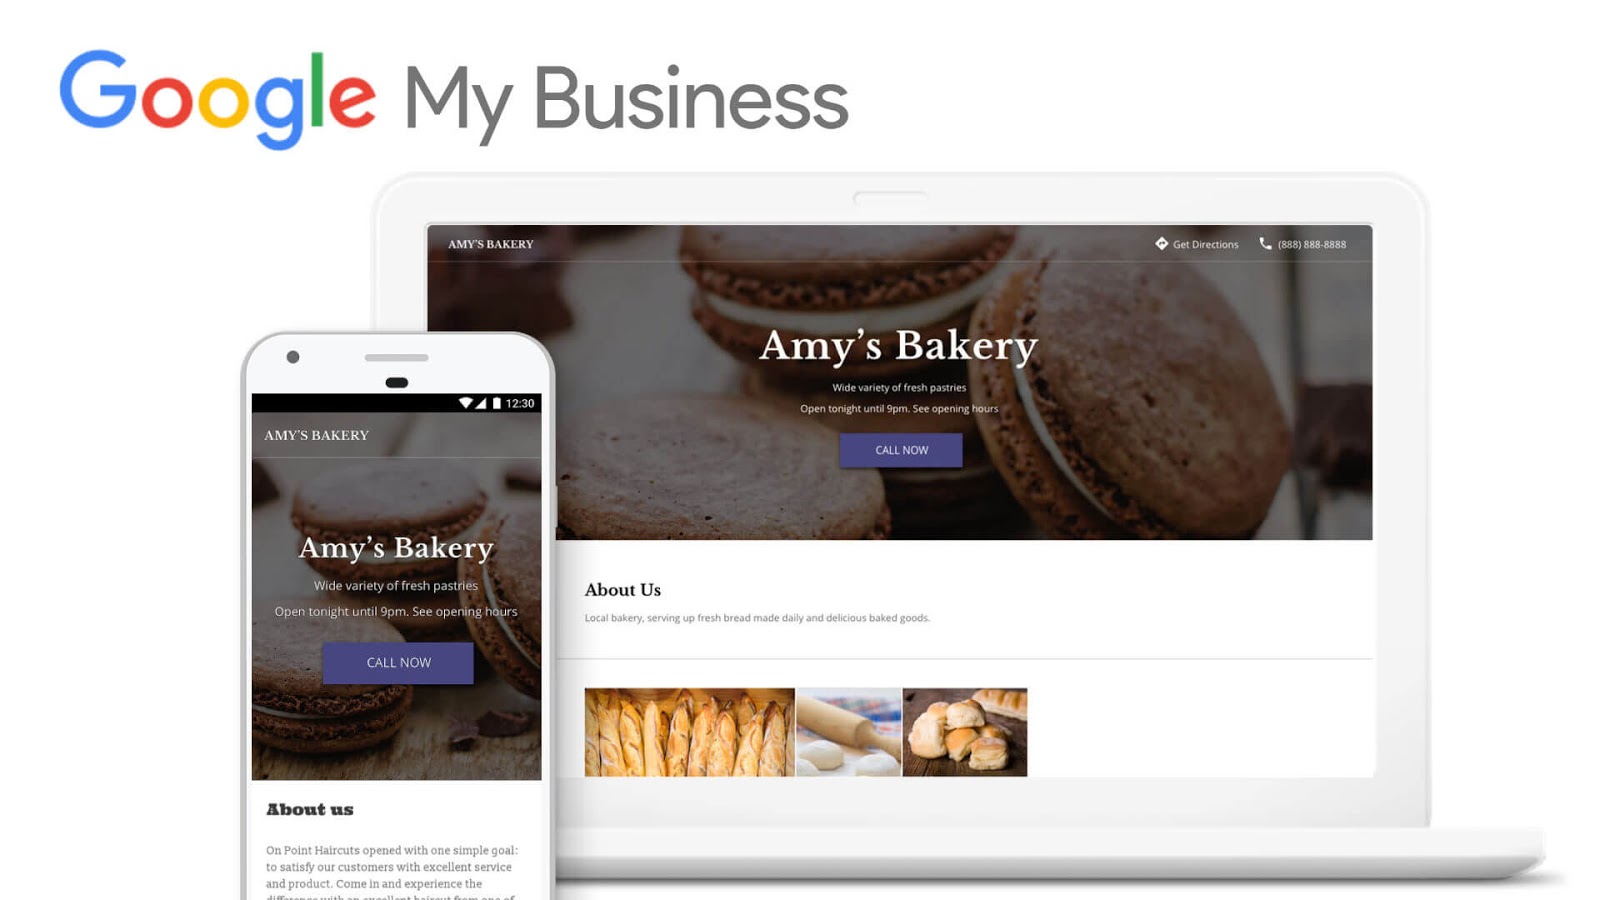 Google Business Profile website builder interface showing a website for a business called, Amy's Bakery